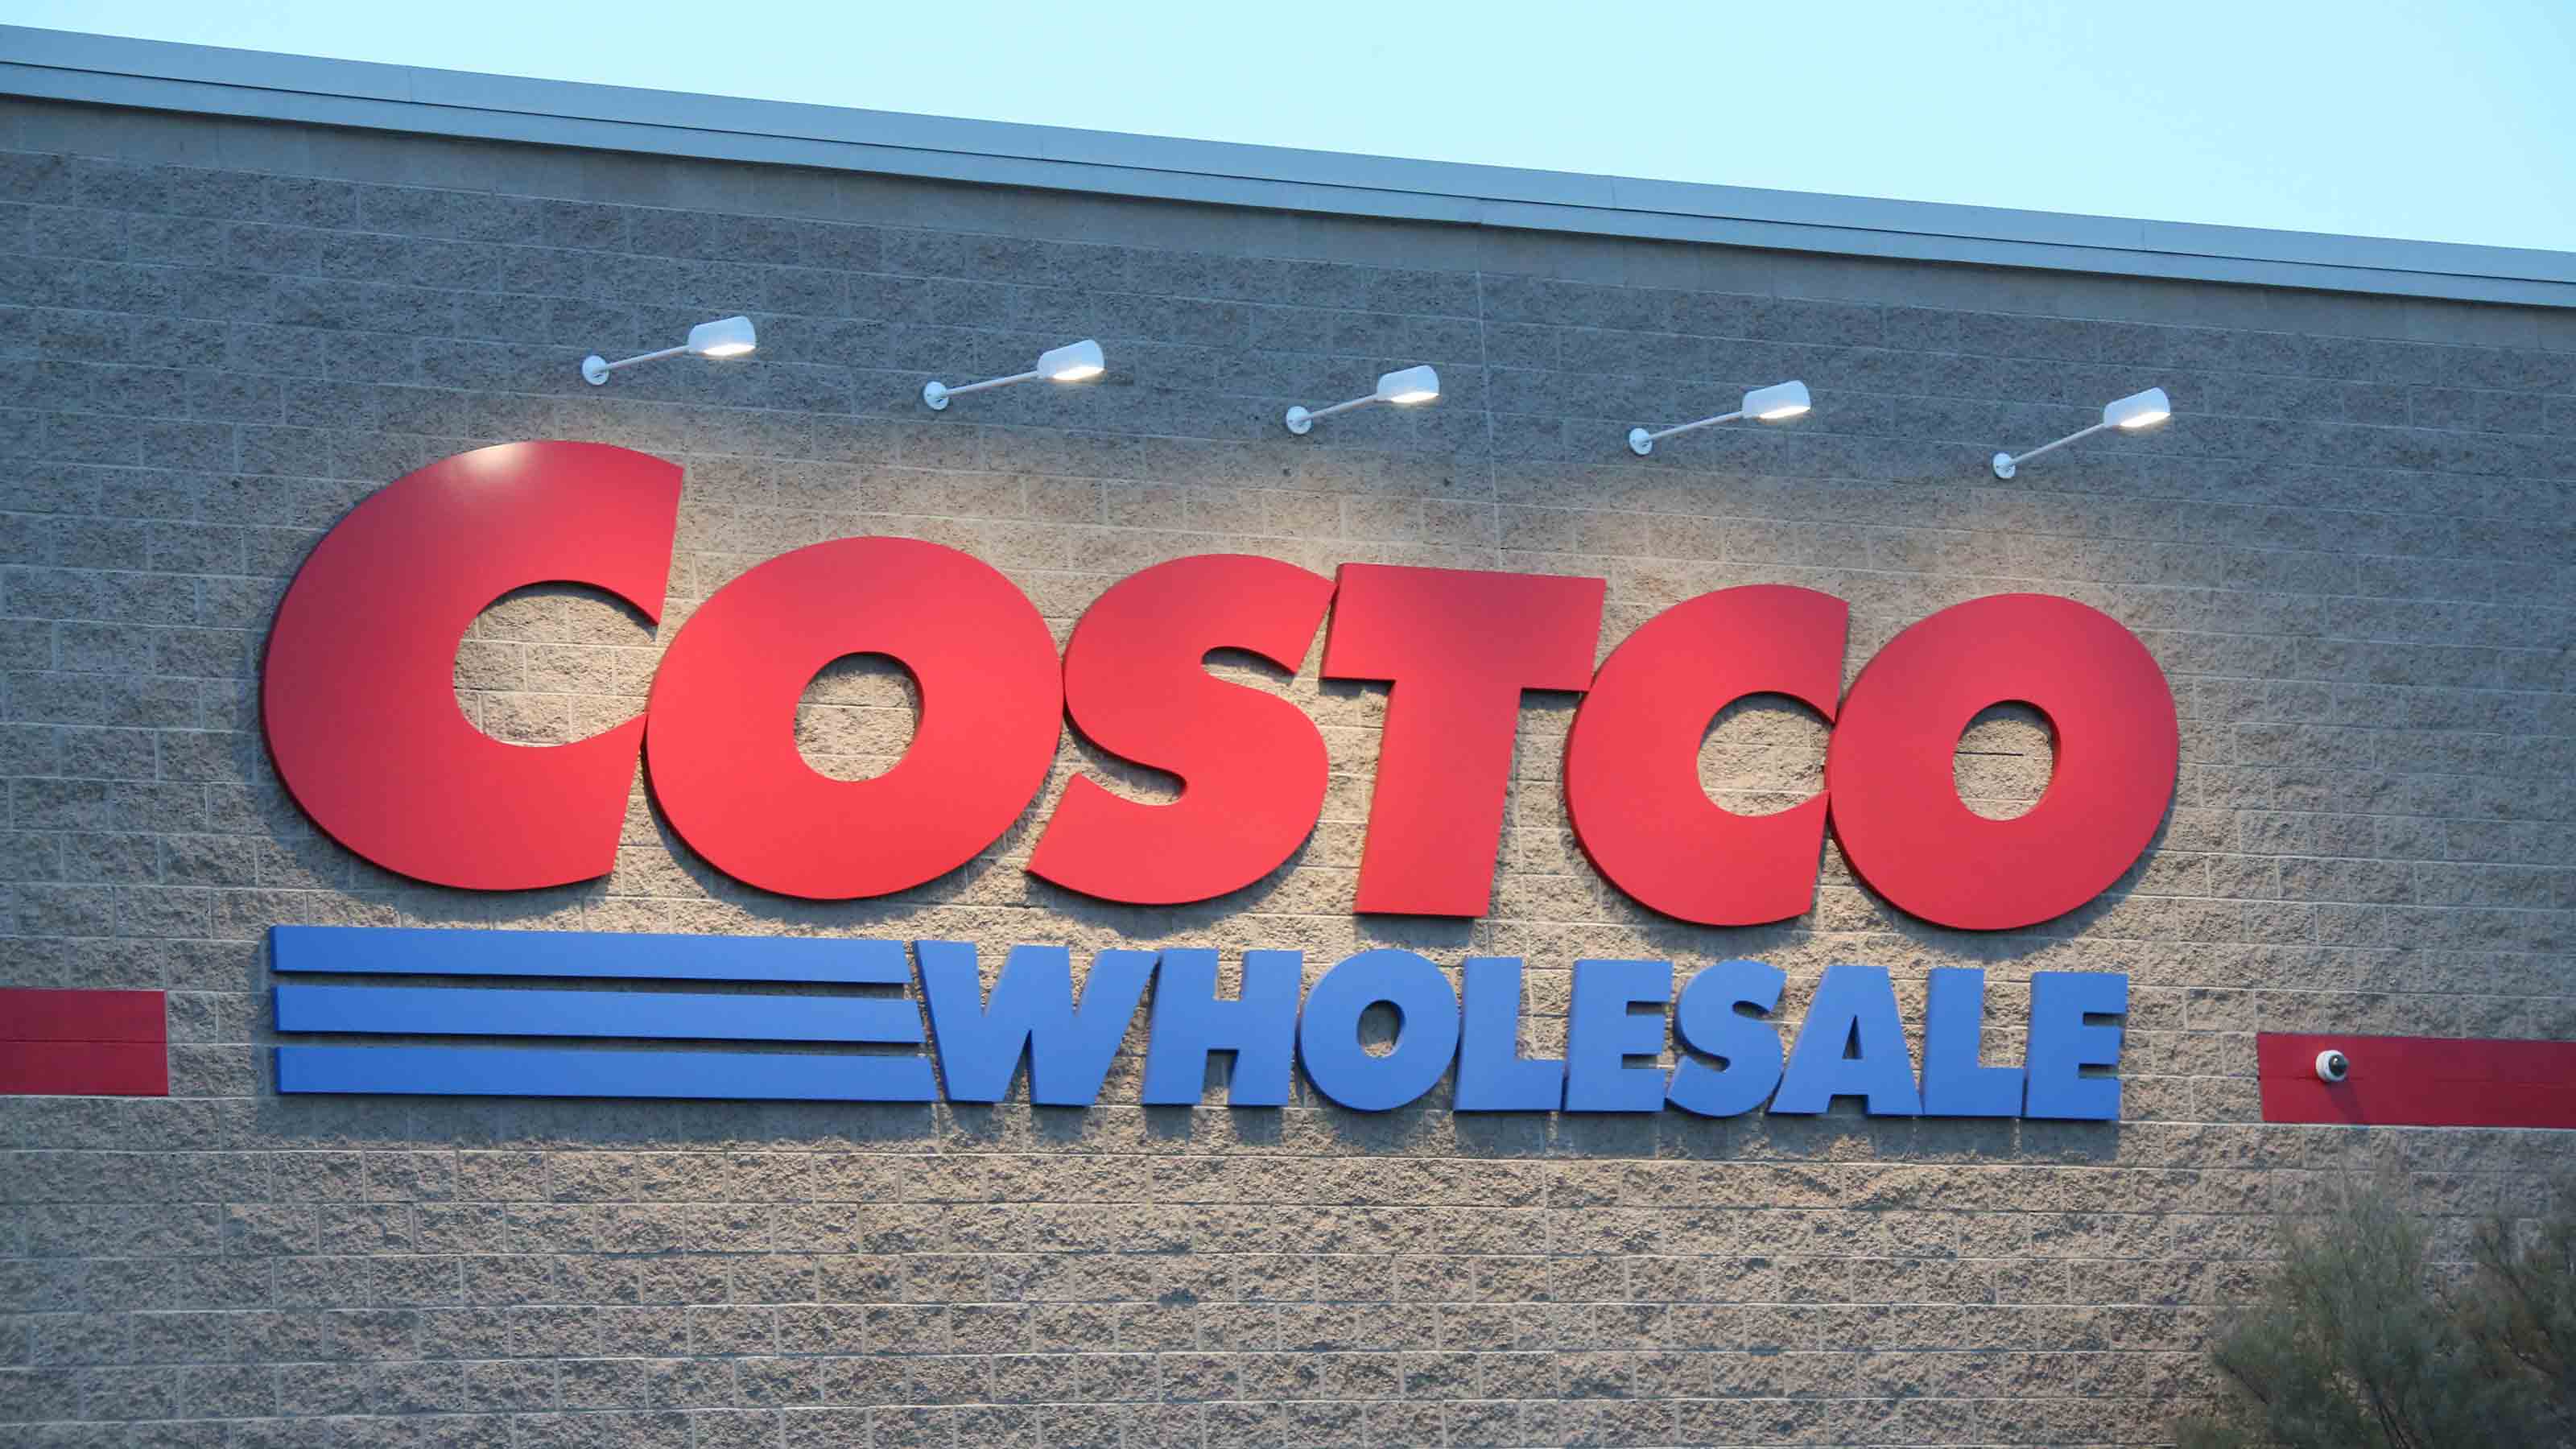 Costco has become an unlikely destination for clothes - The Washington Post